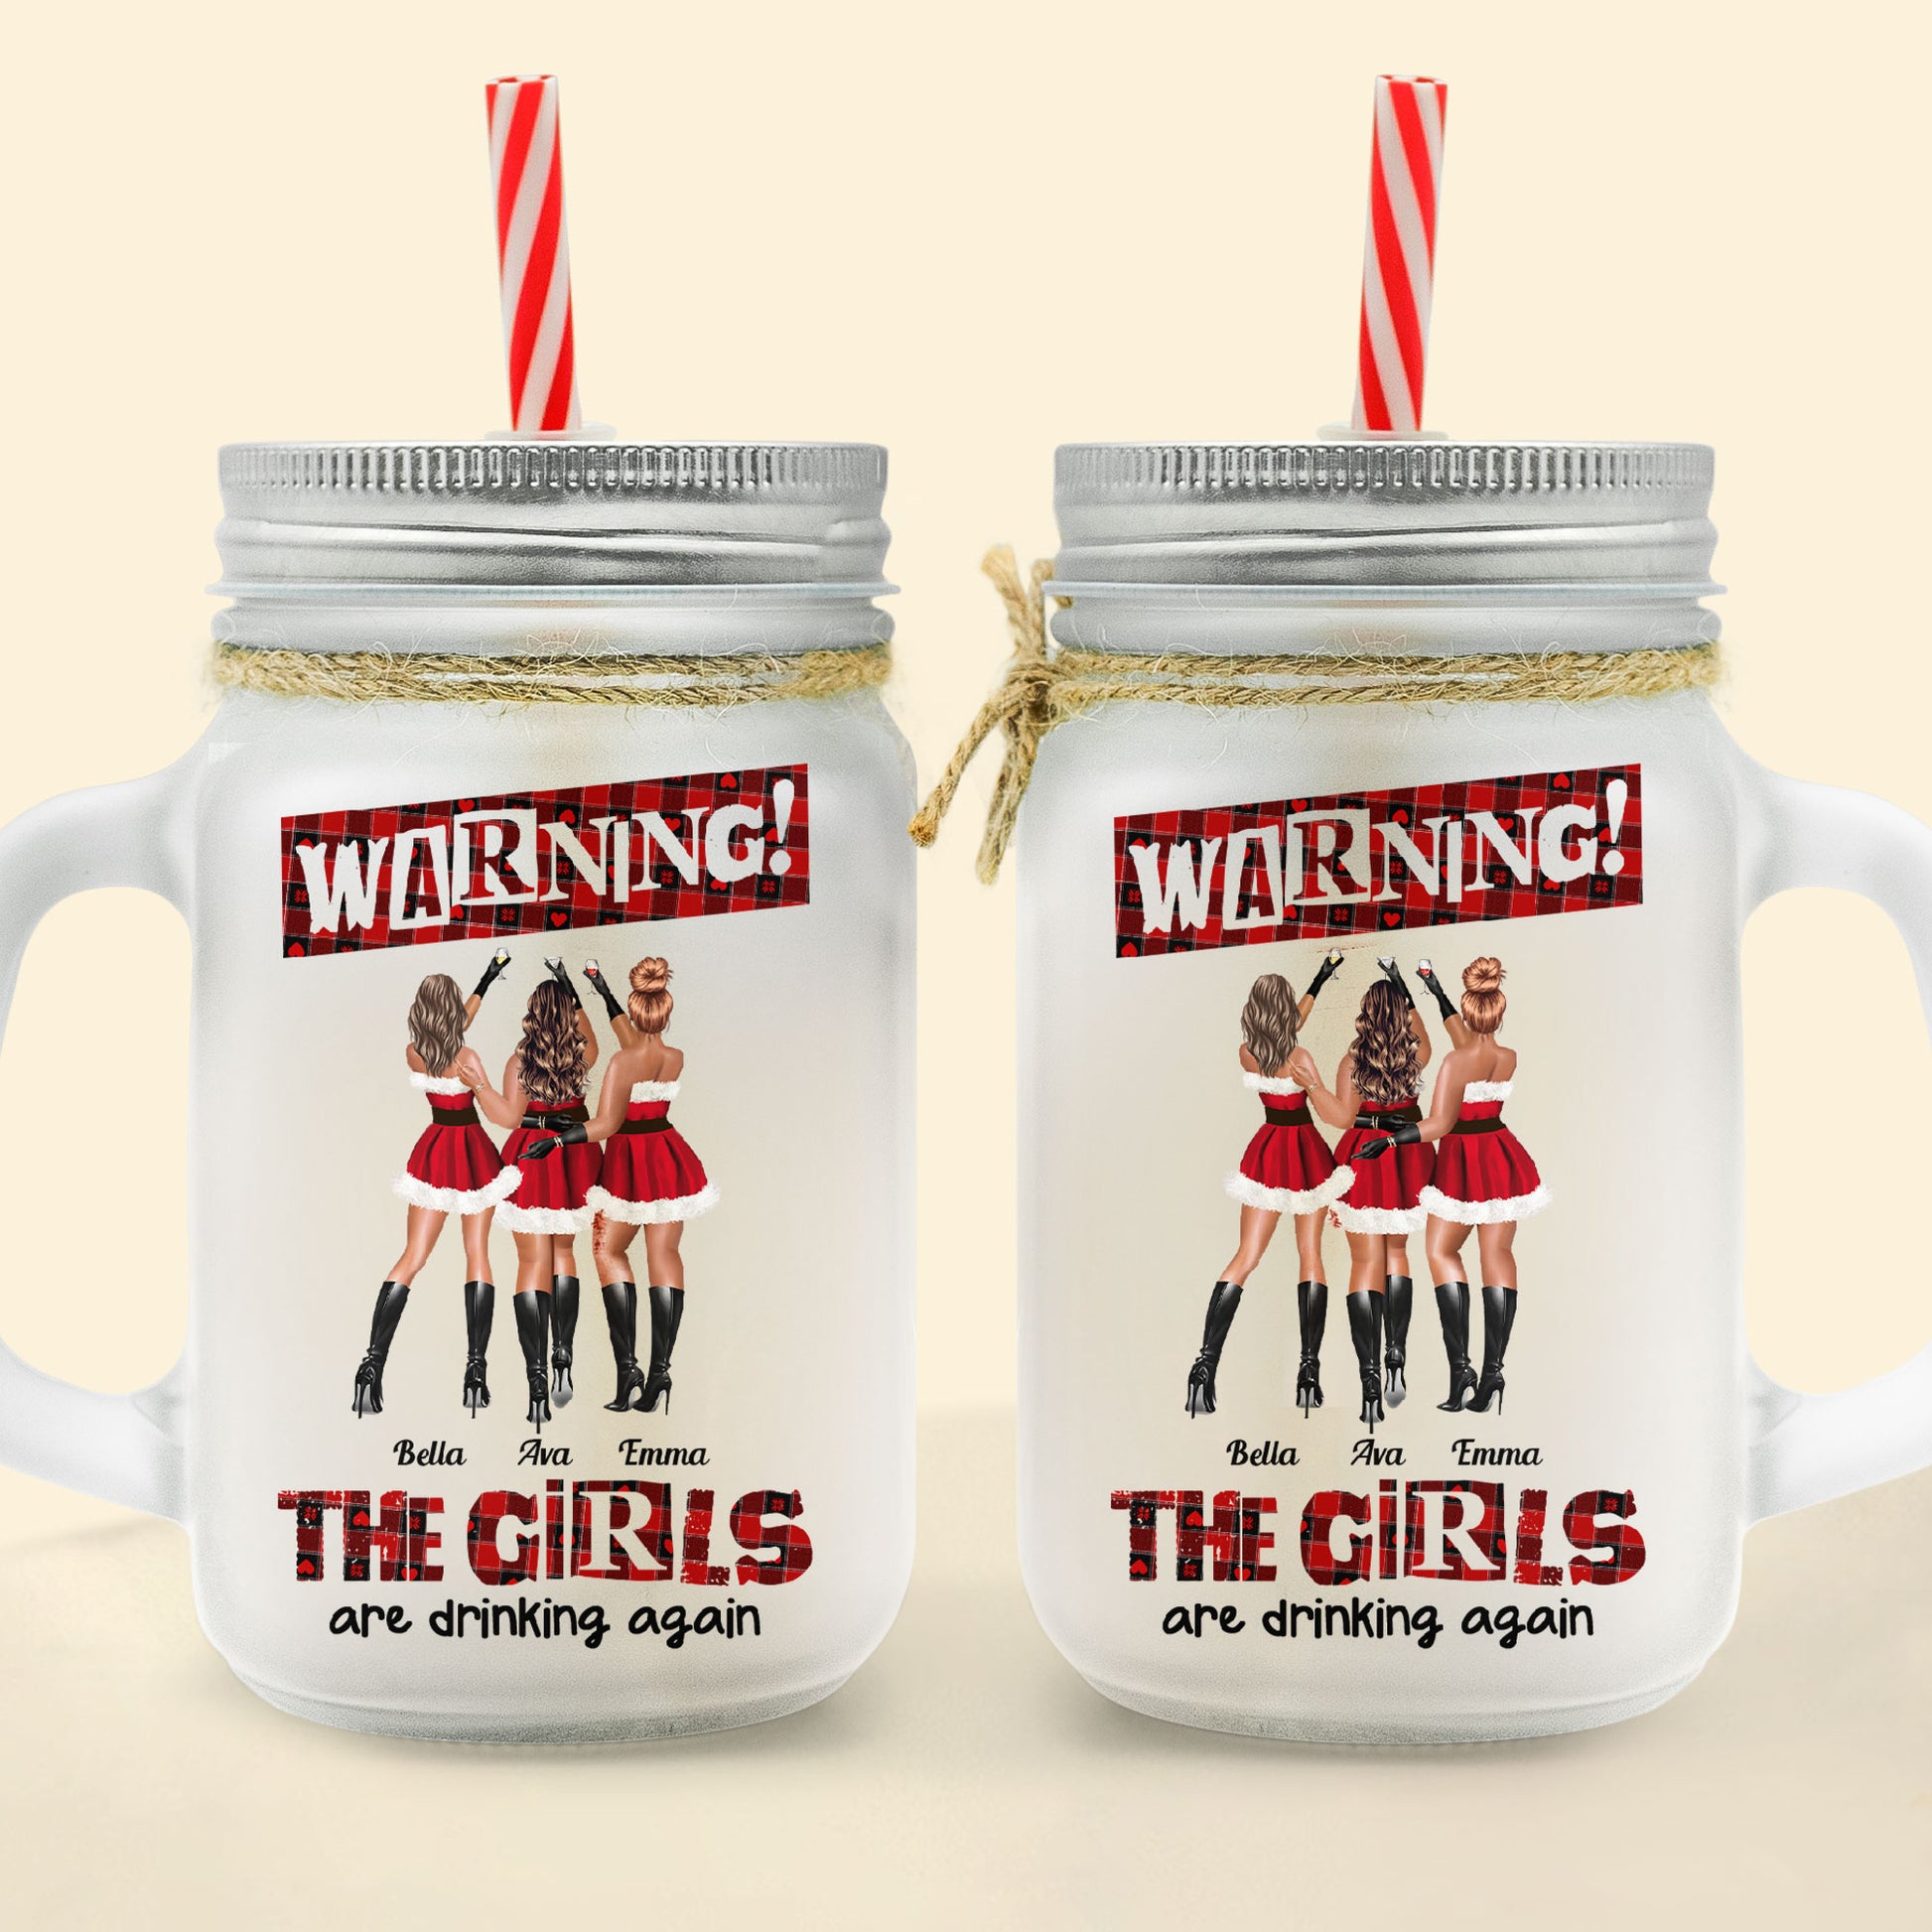 There No Greater Gift Than Friendship - Personalized Mason Jar Cup With  Straw